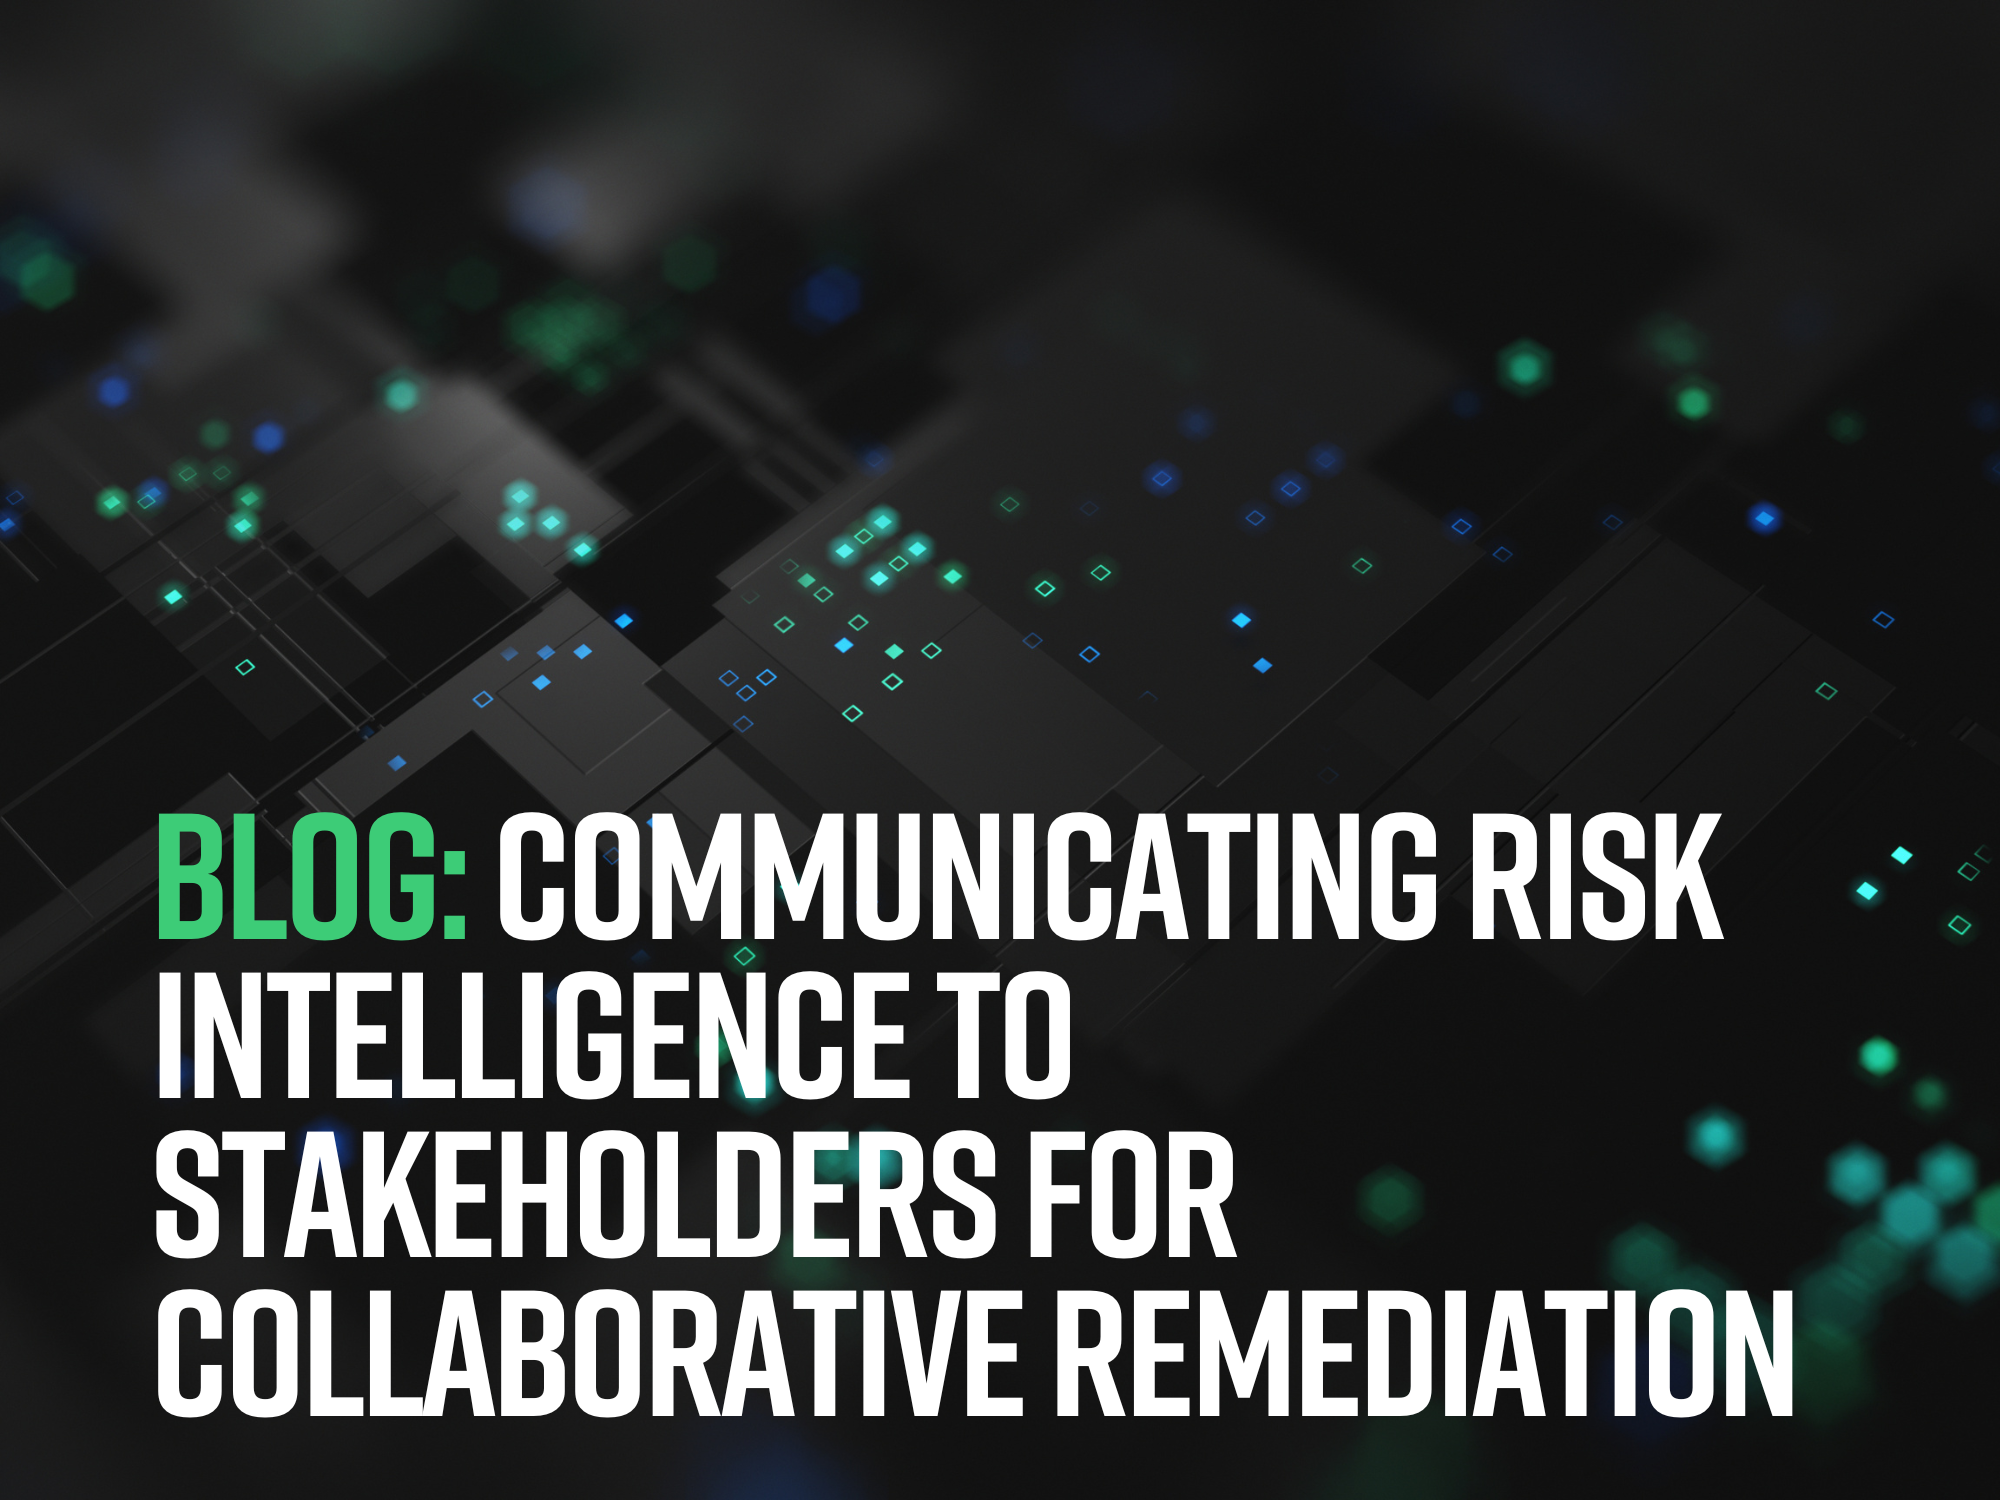 Matrix image with green lights and text: "Blog: Communicating Risk Intelligence to Stakeholders for Collaborative Remediation"